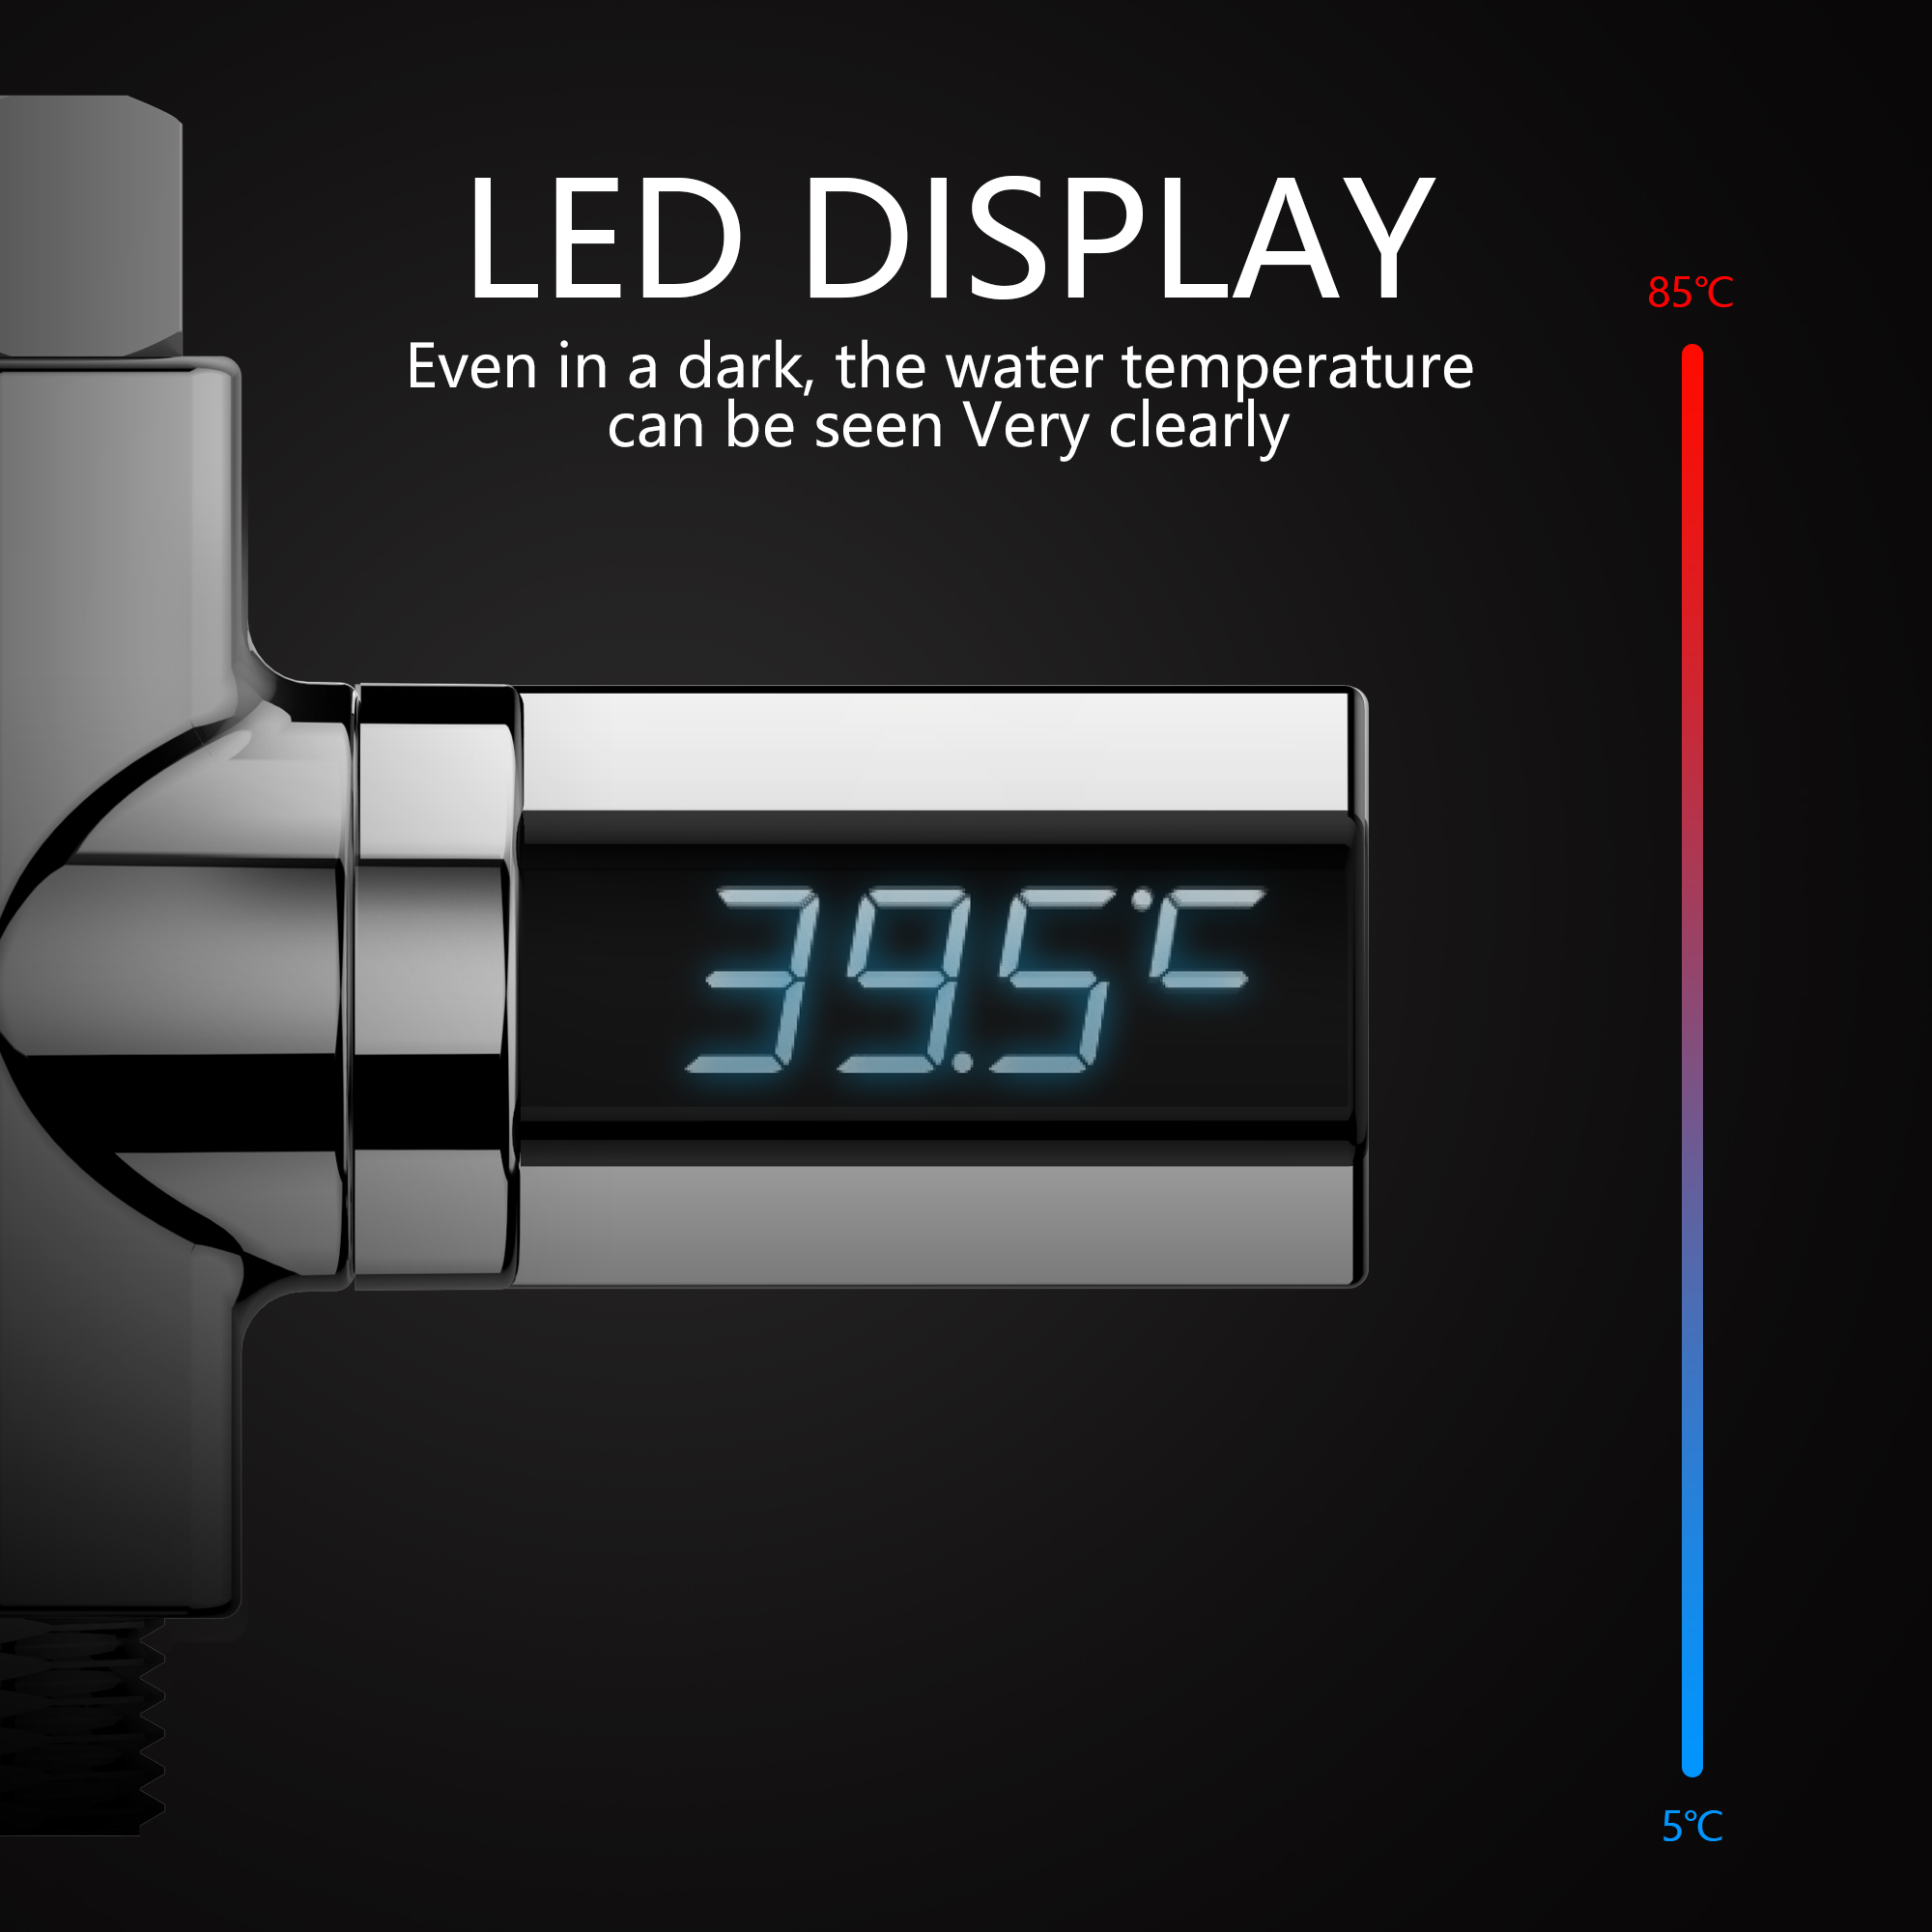 Loskii LW-102 LED Celsius Display Water Shower Thermometer Celsius Flow Self-Generating Electricity Water Temperture Meter Monitor Energy Smart Meter 9